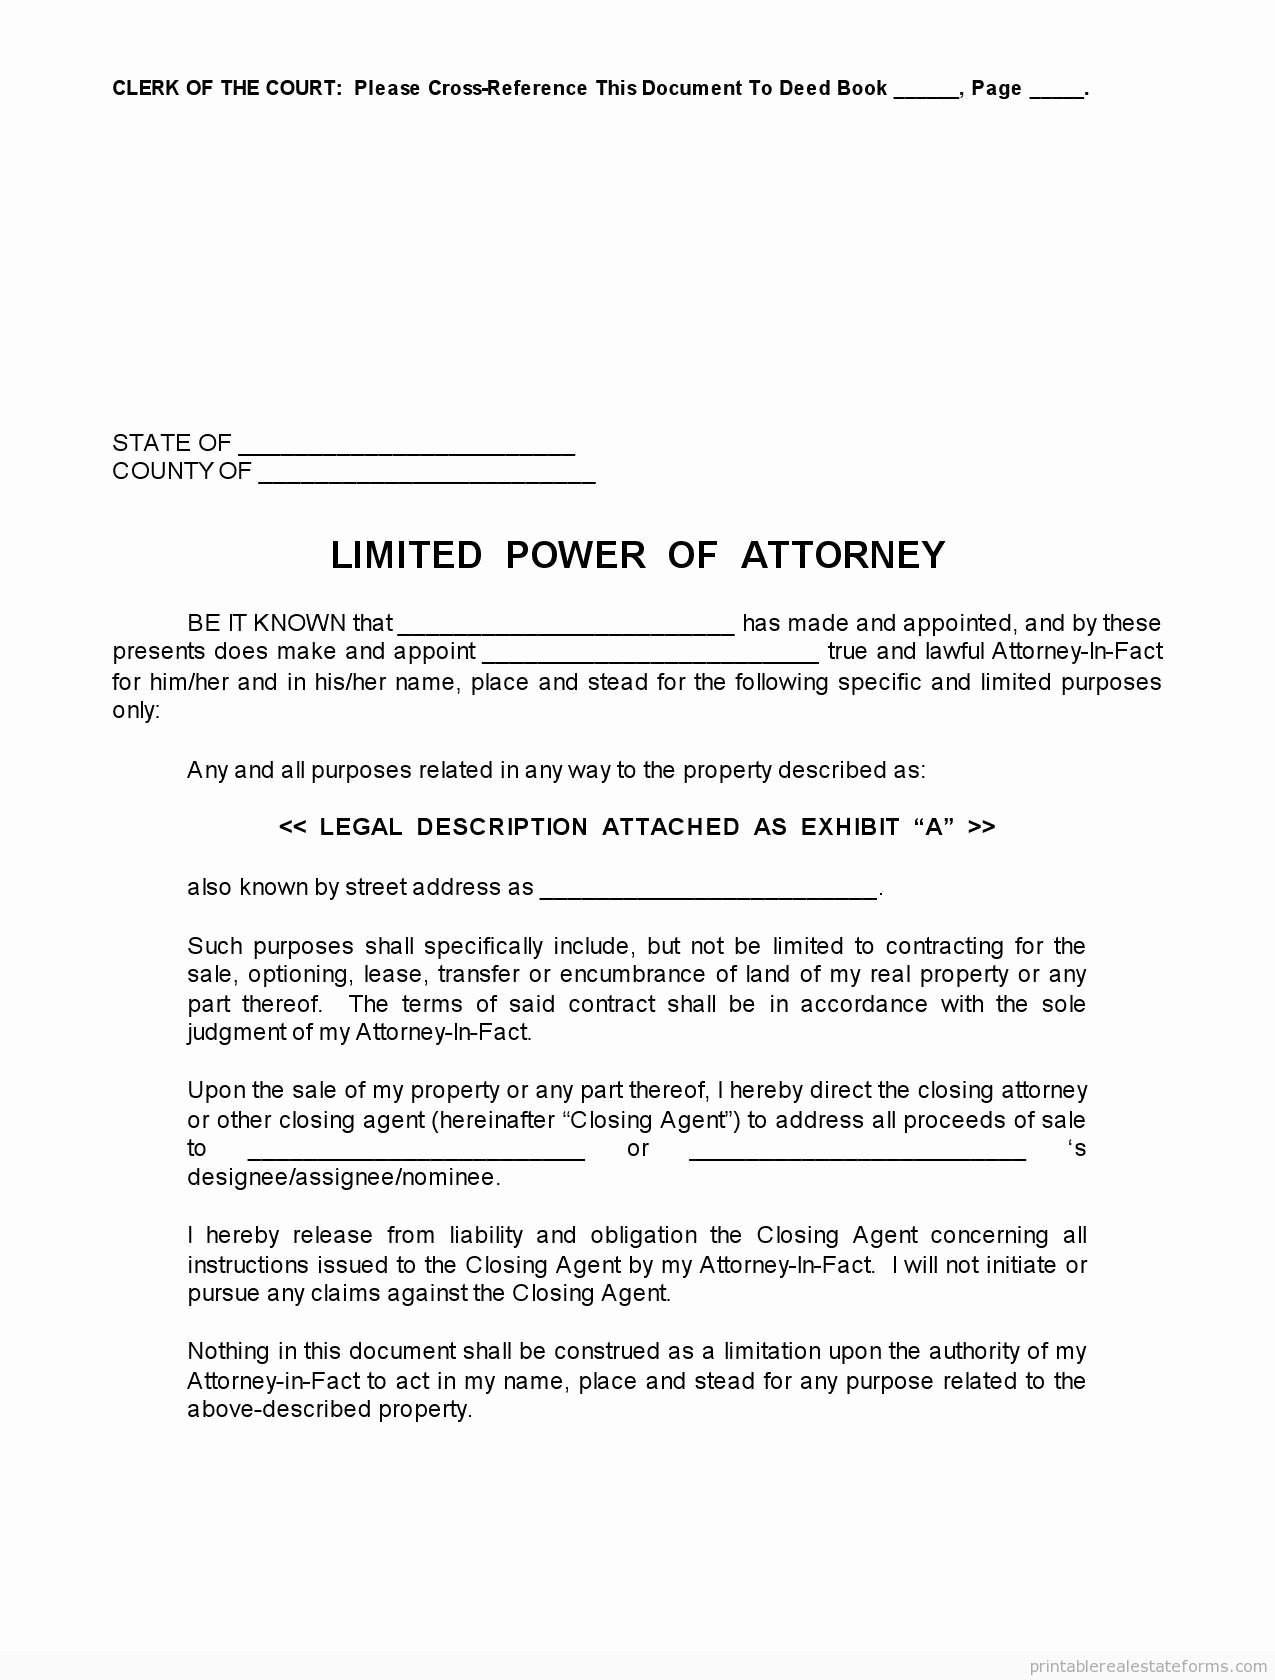 Special Power Of attorney Sample Awesome Sample Printable Limited Power Of attorney form Printable Real Estate forms 2014